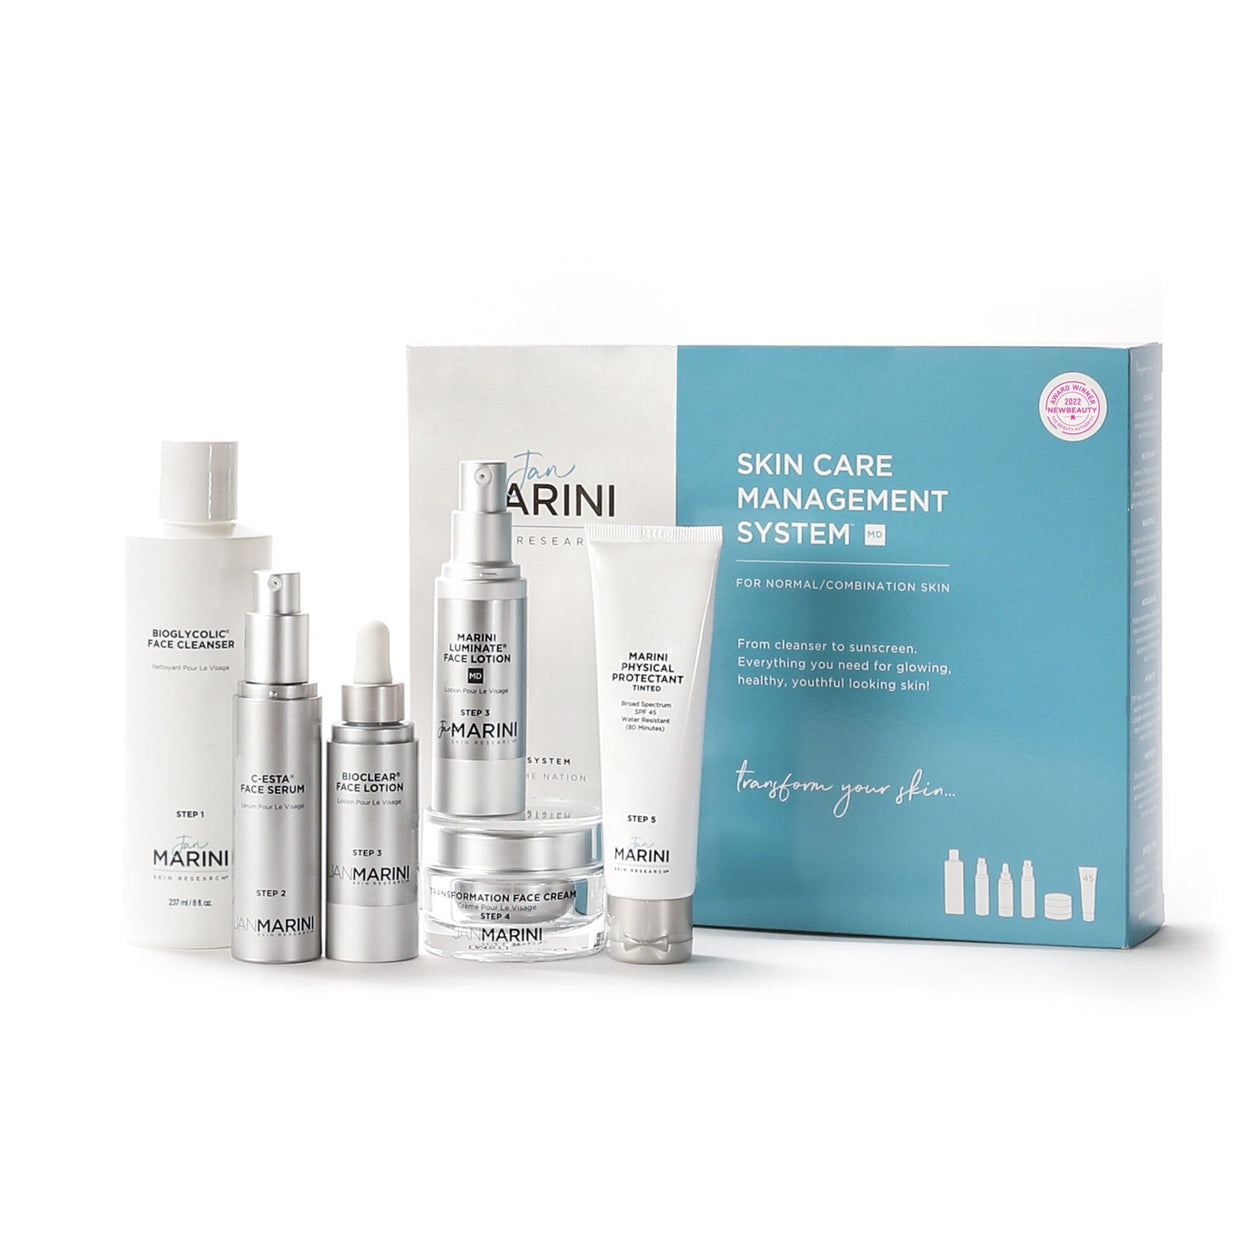 Jan Marini Skin Care Management System MD - Normal/Combination Skin with Marini Physical Protectant Tinted SPF 45 Anti-Aging Skin Care Kits Jan Marini Shop at Exclusive Beauty Club